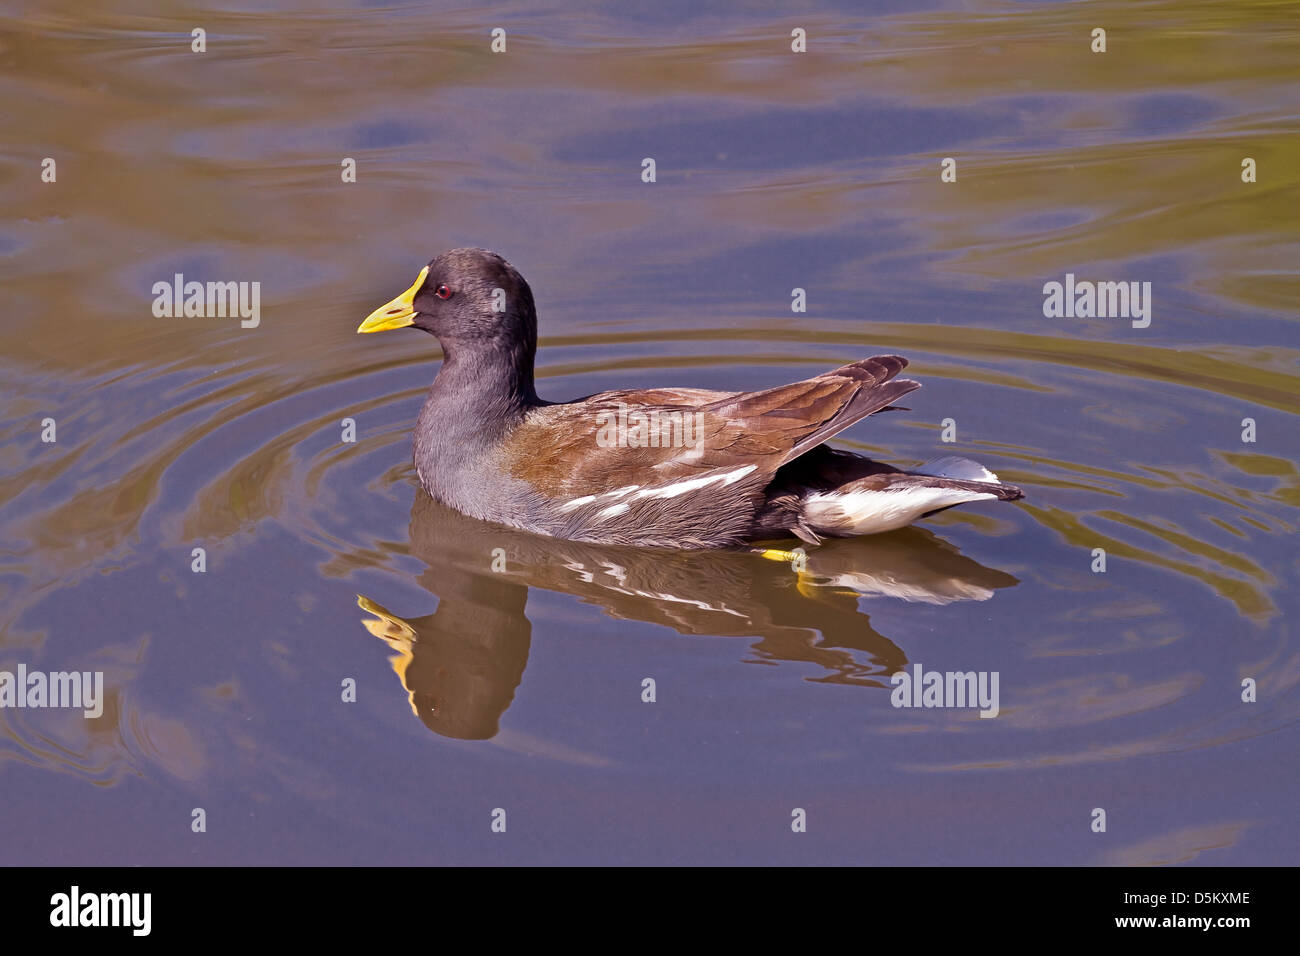 A moorhen with a yellow bill Stock Photo